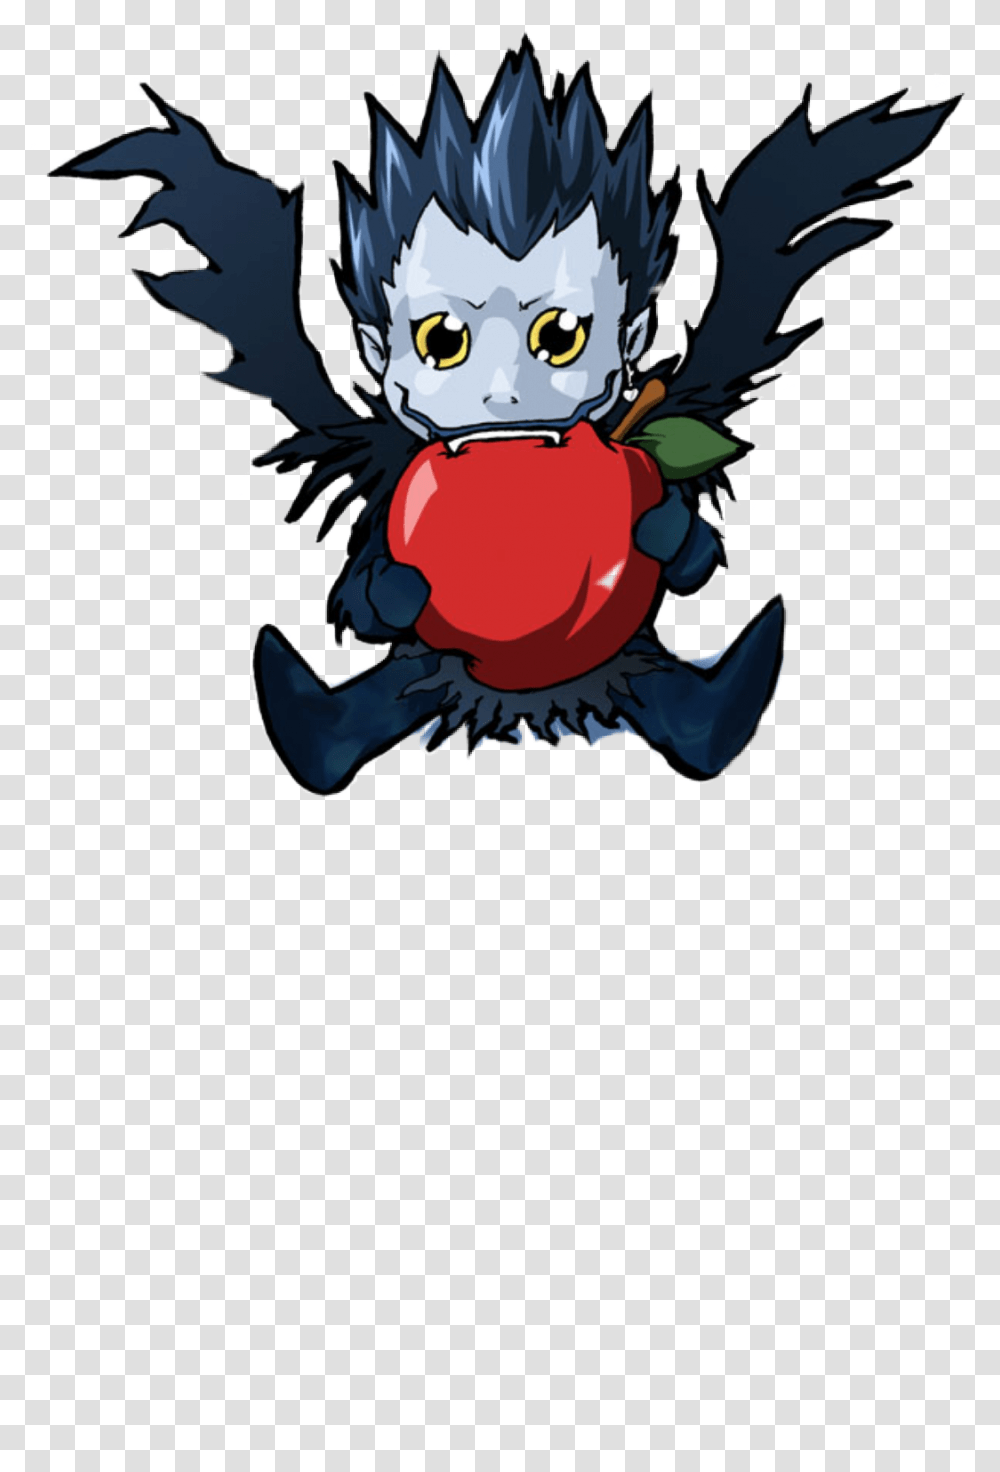 Ldid You Know God's Of Death Love Apples Not My Artpicture, Plant, Label Transparent Png